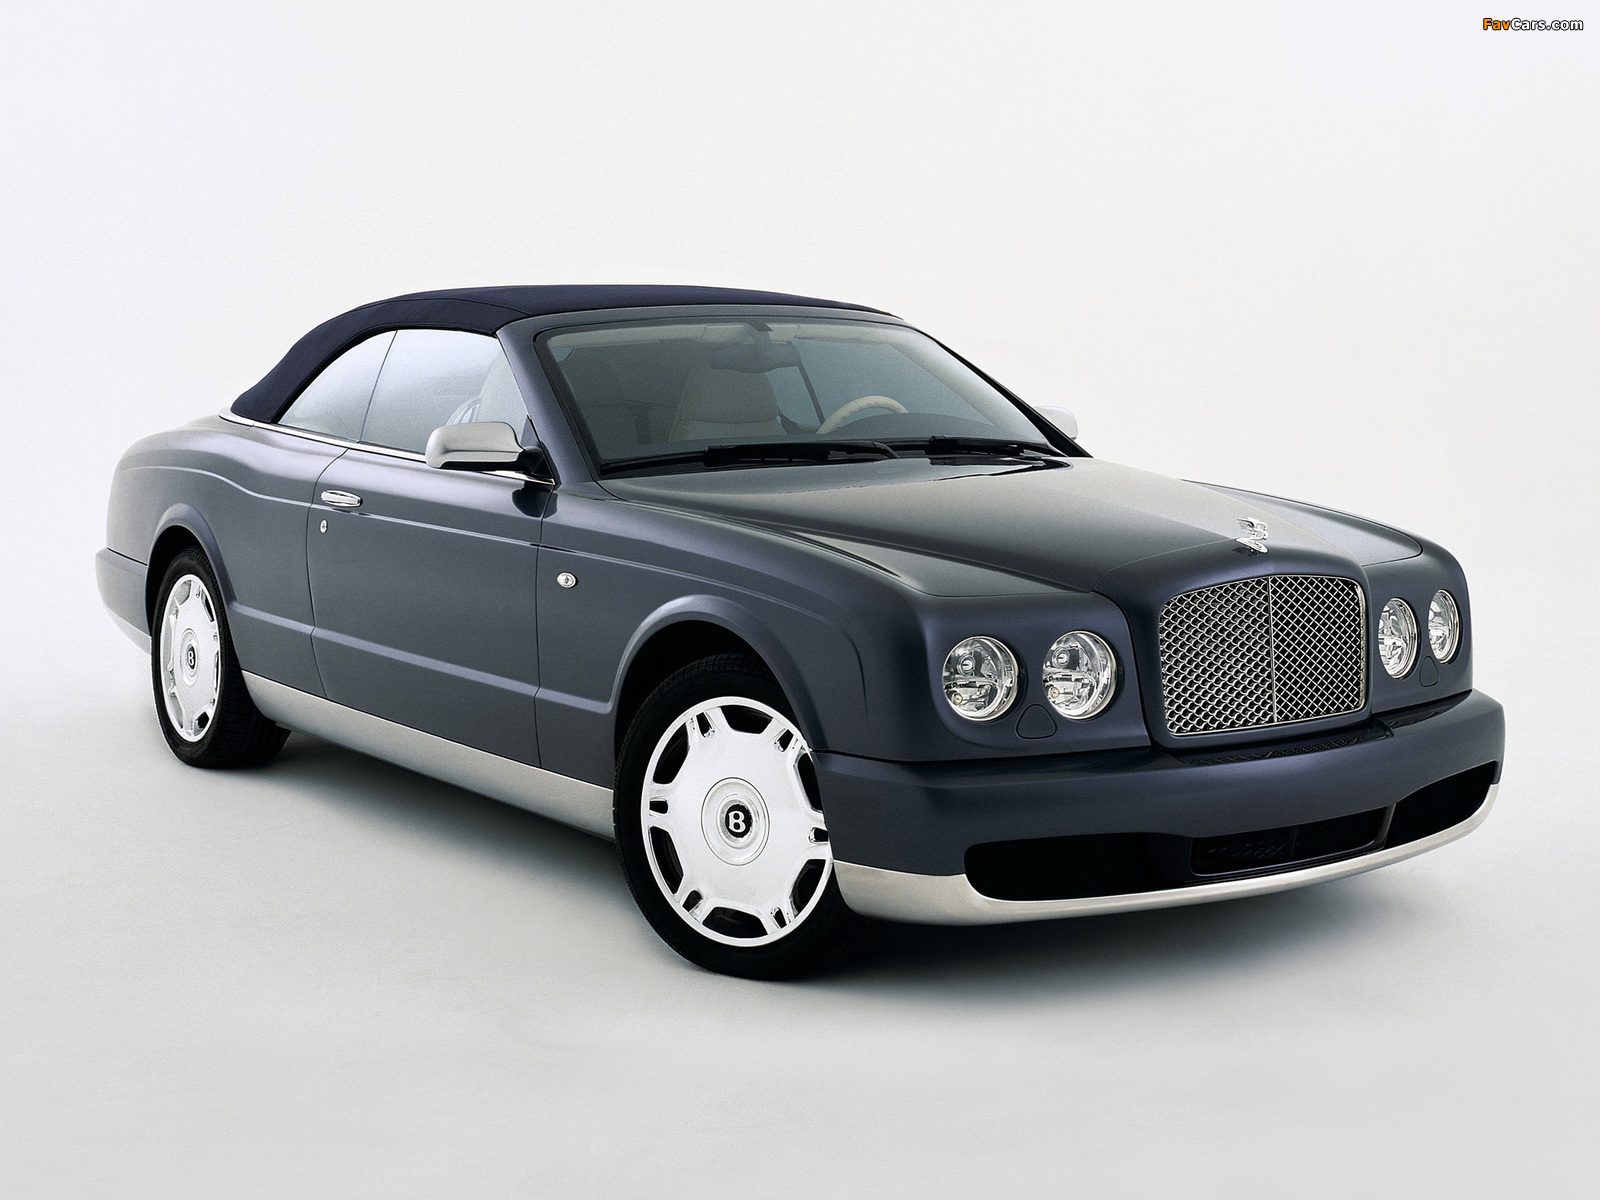 Pictures of Bentley Arnage Drophead Coupe Concept 2005 (1600 x 1200)